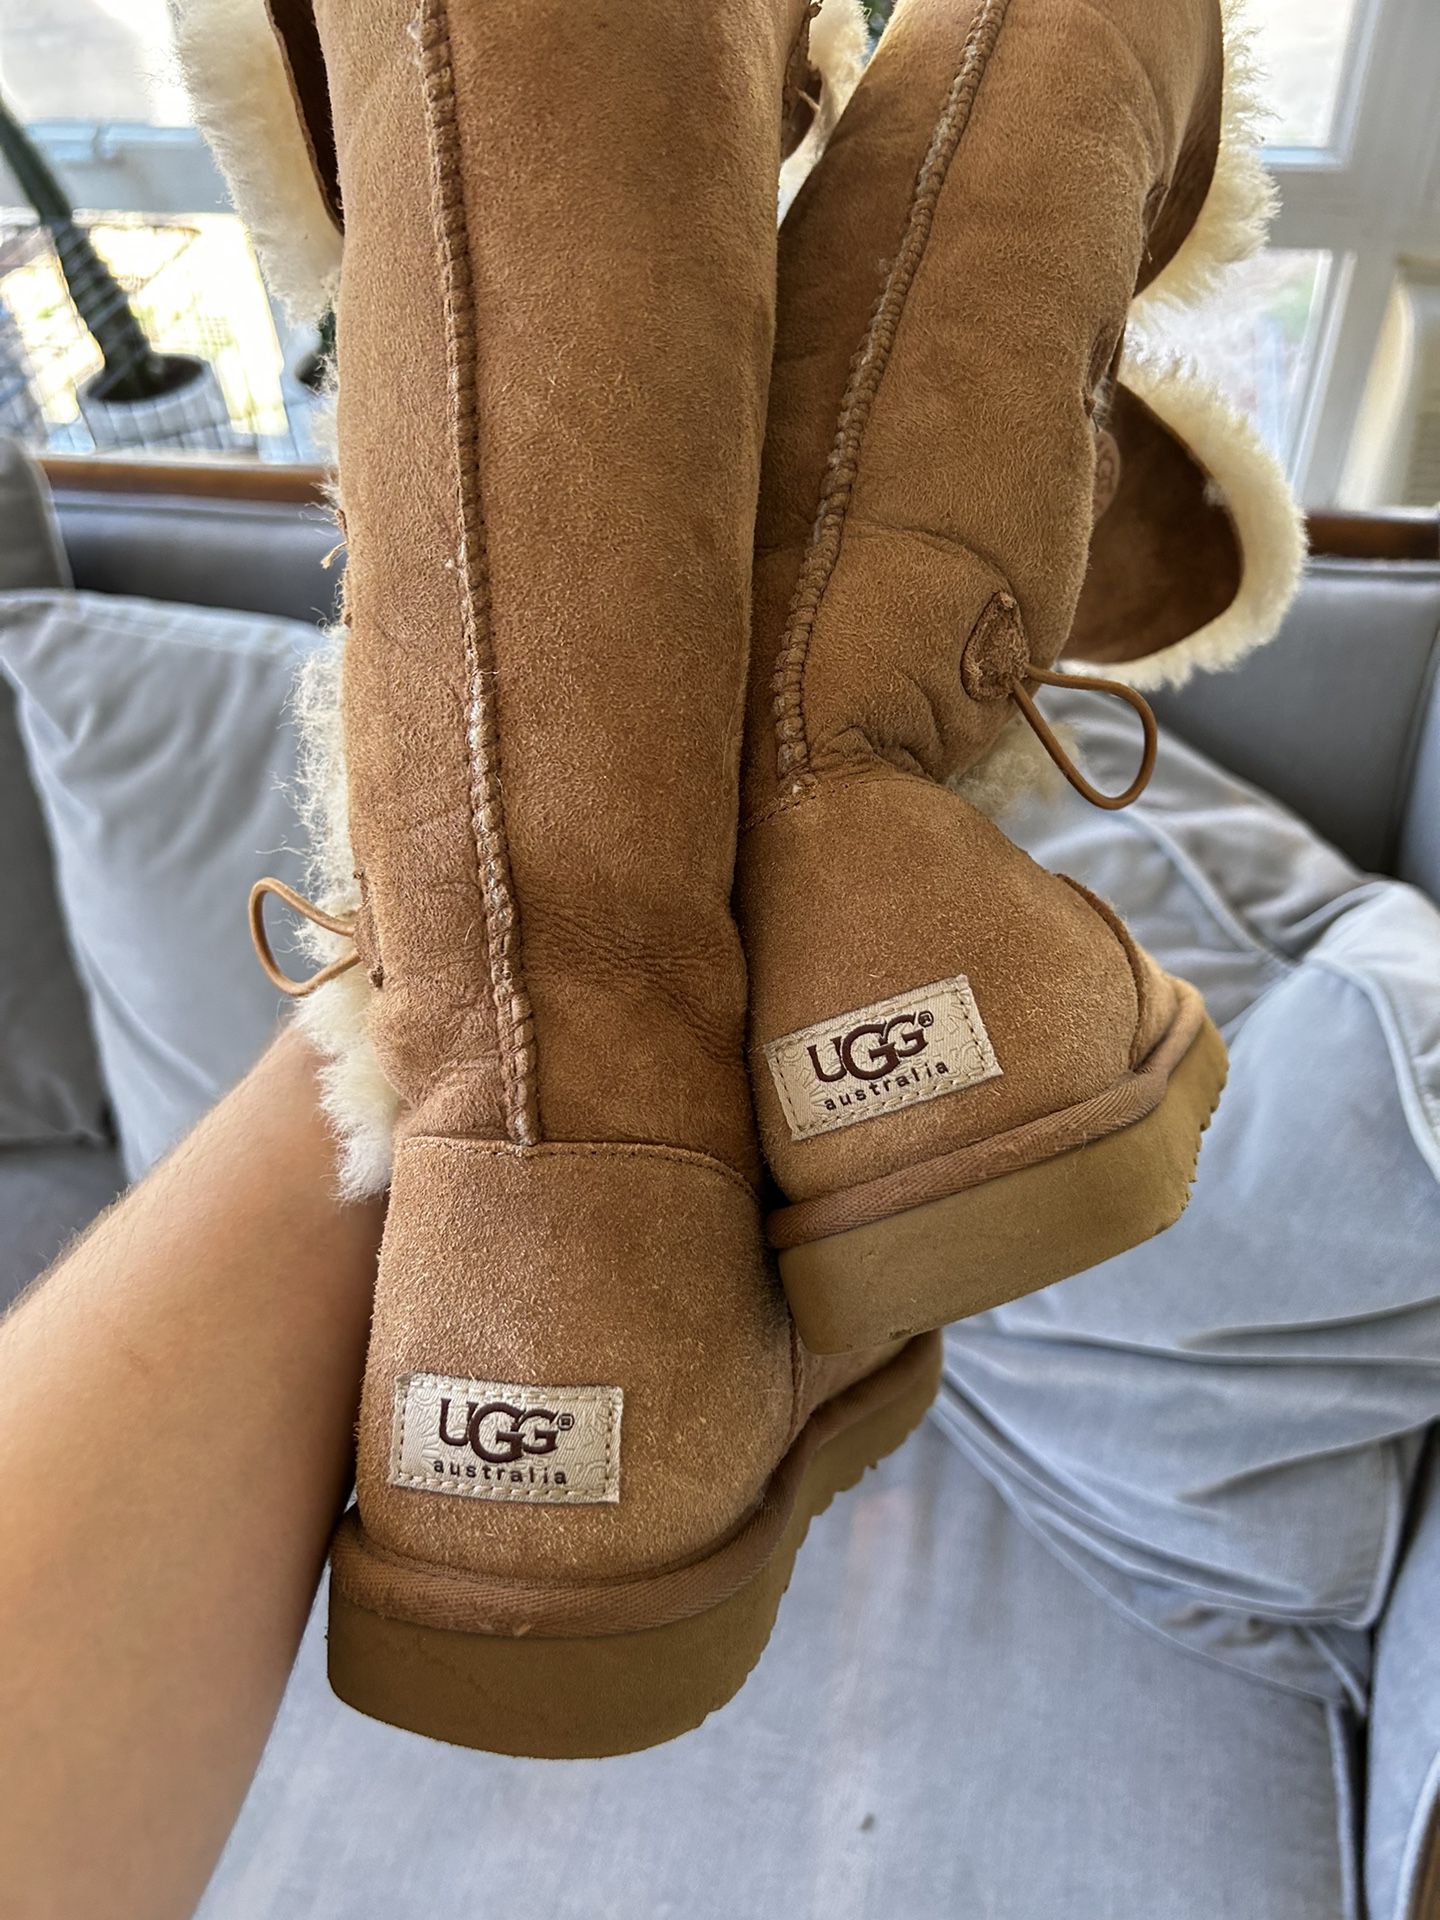 COPY - Gucci Ugg Boots  Ugg boots, Uggs, Boots